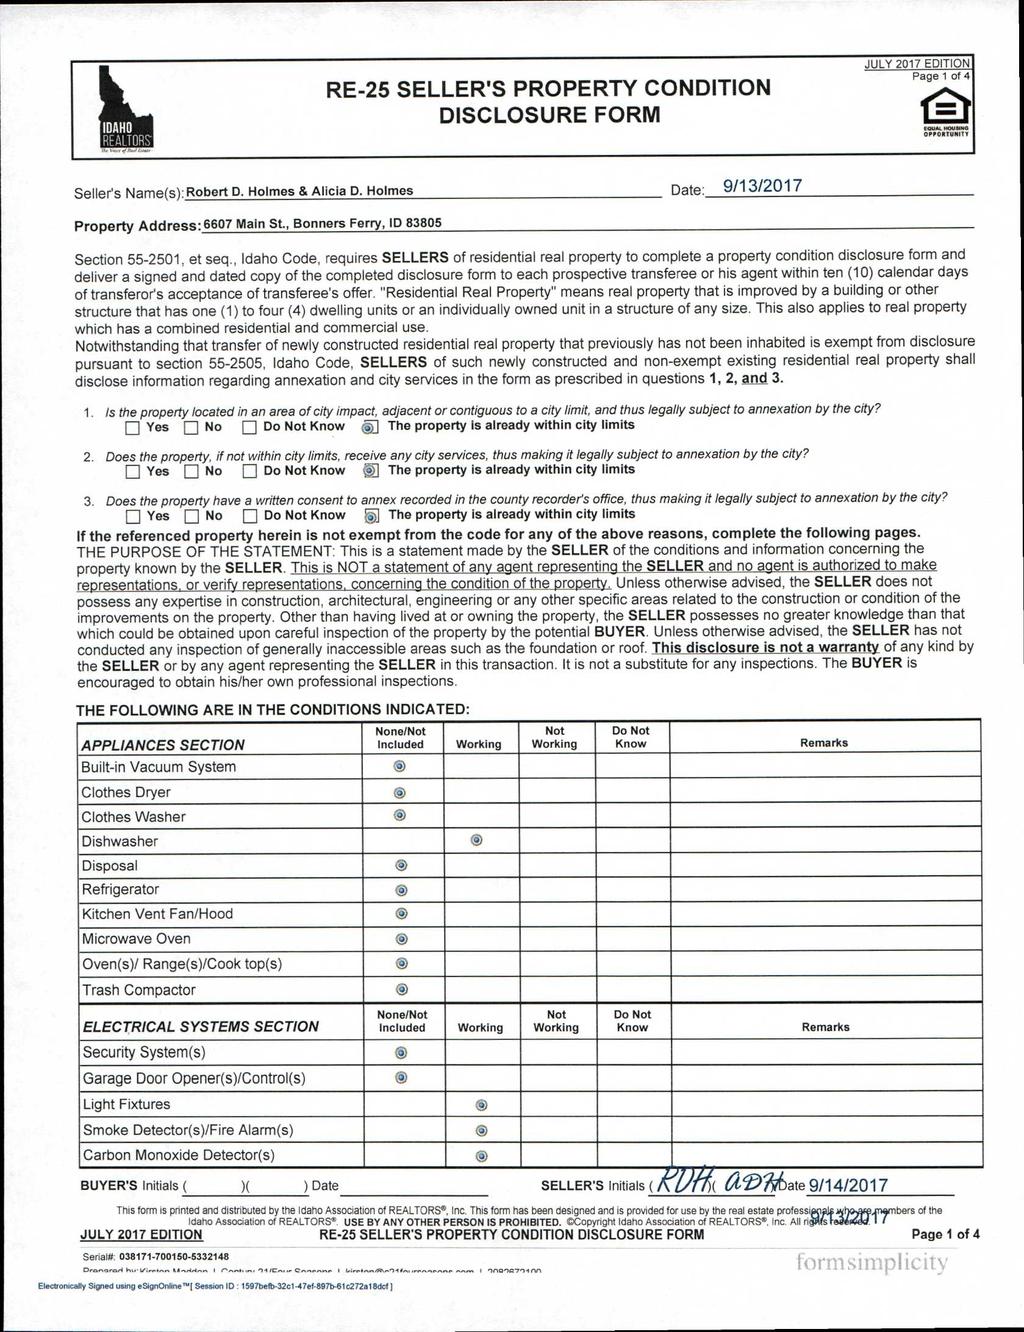 IDAHO REALTORS RE-25 SELLER'S PROPERTY CONDITION DISCLOSURE FORM JULY 2017 EDITION Page 1 of 4 OPPORTUNITY TY Seller's Name(s):Robert D. Holmes & Alicia D.